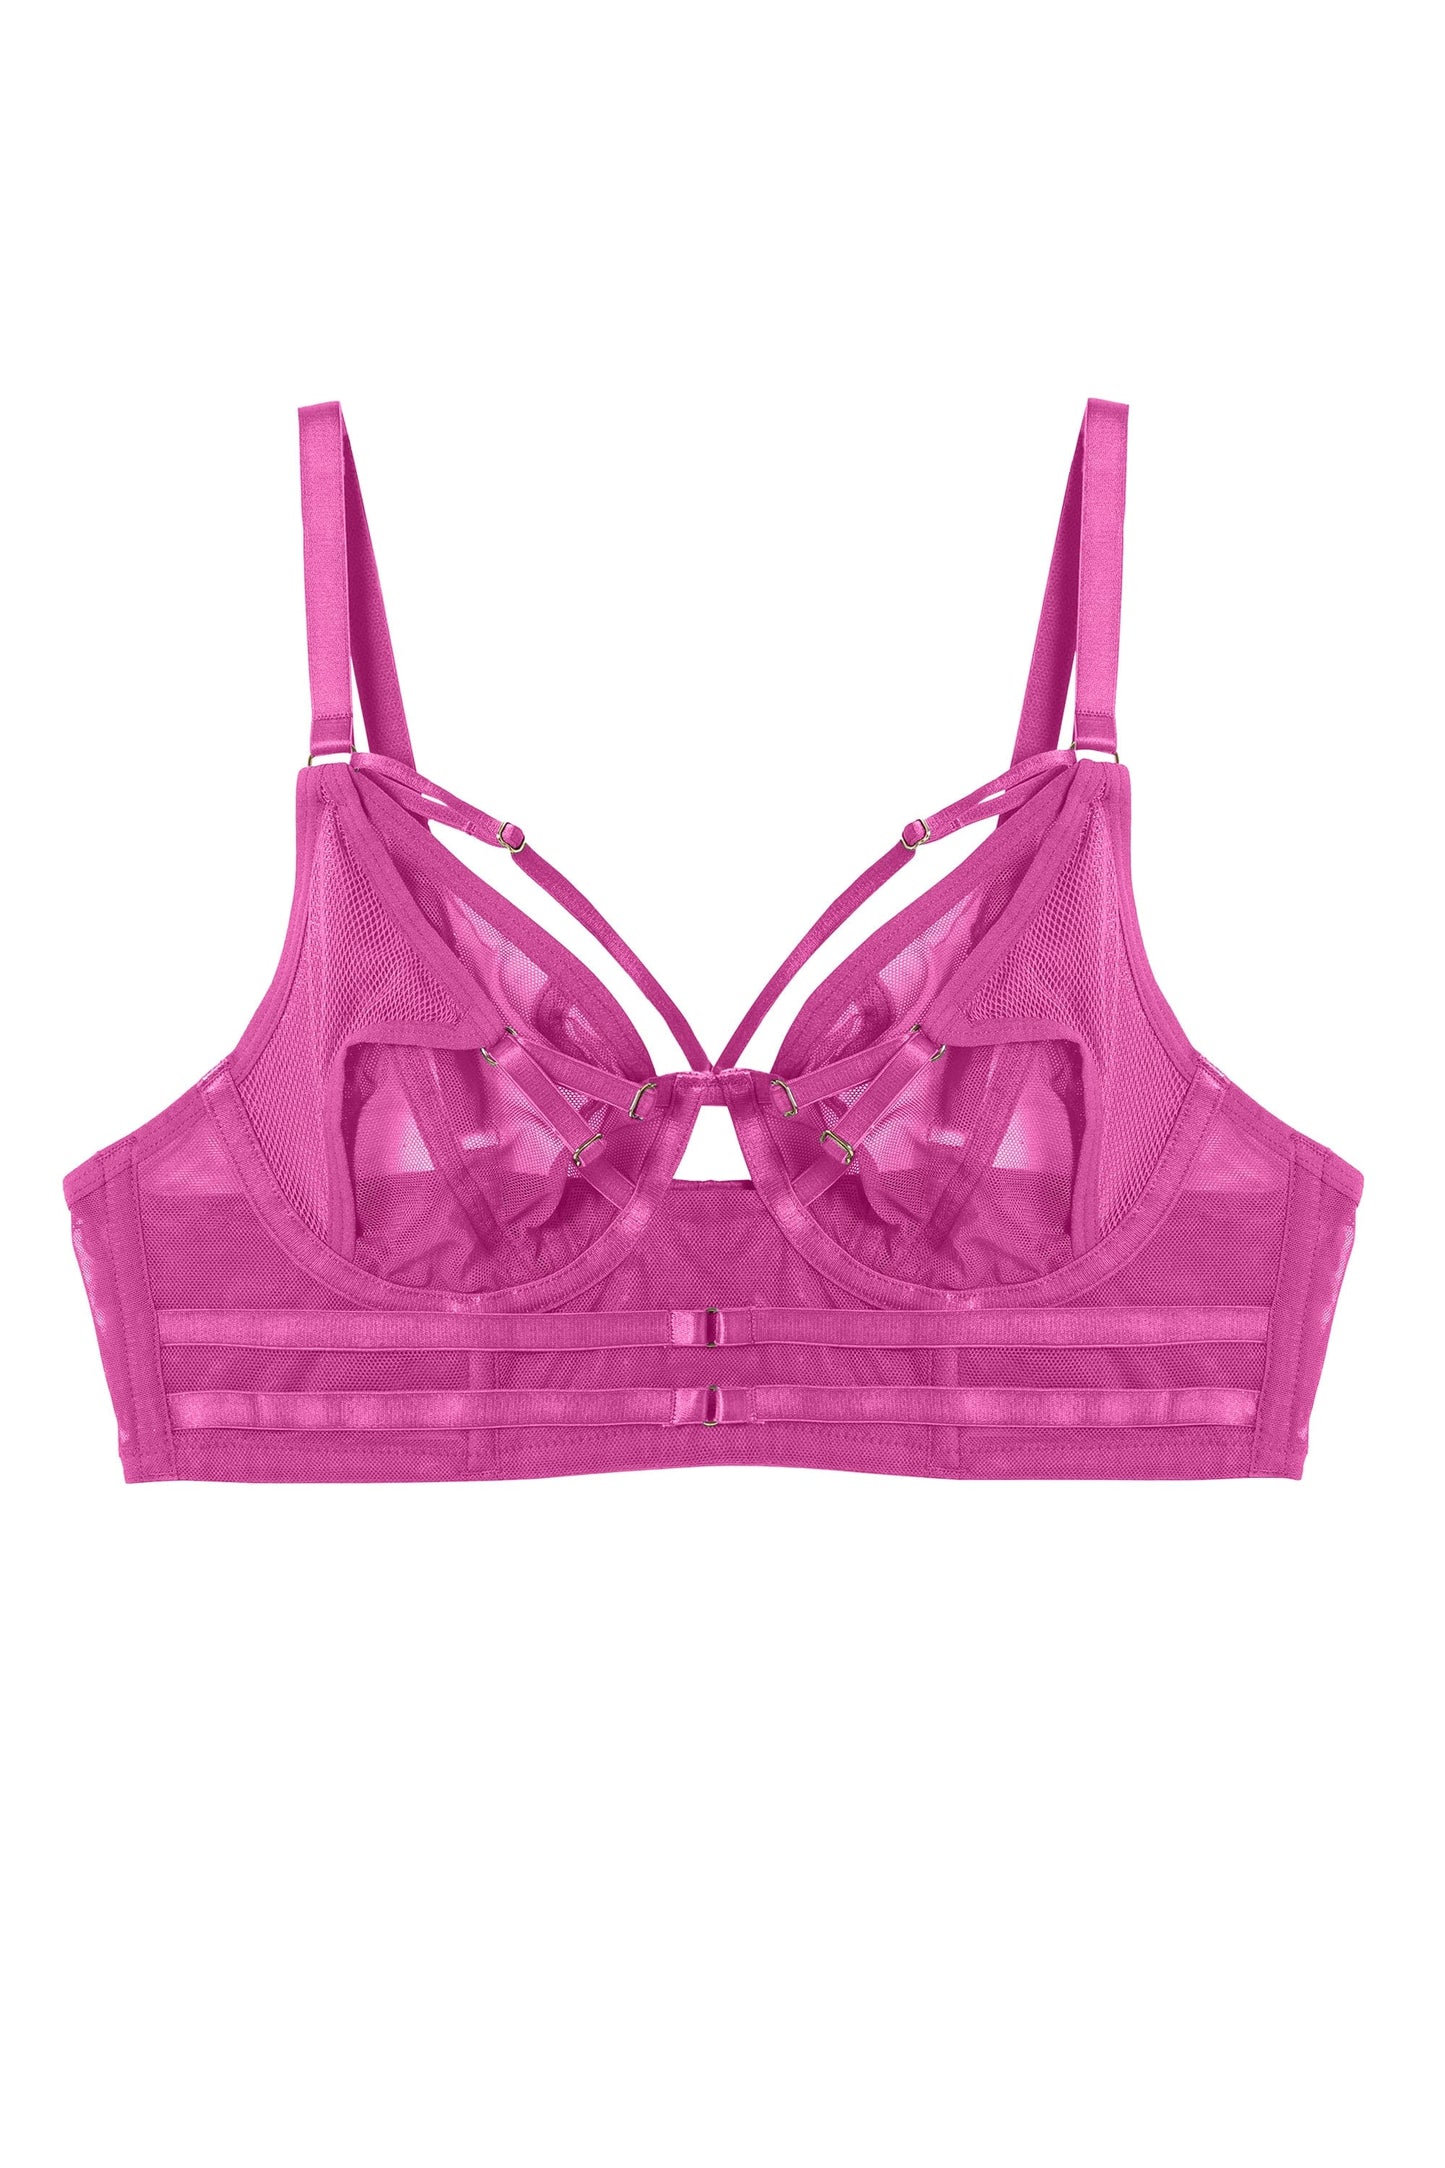 Do you like this hot pink bralette from the BOLD and BRIGHT